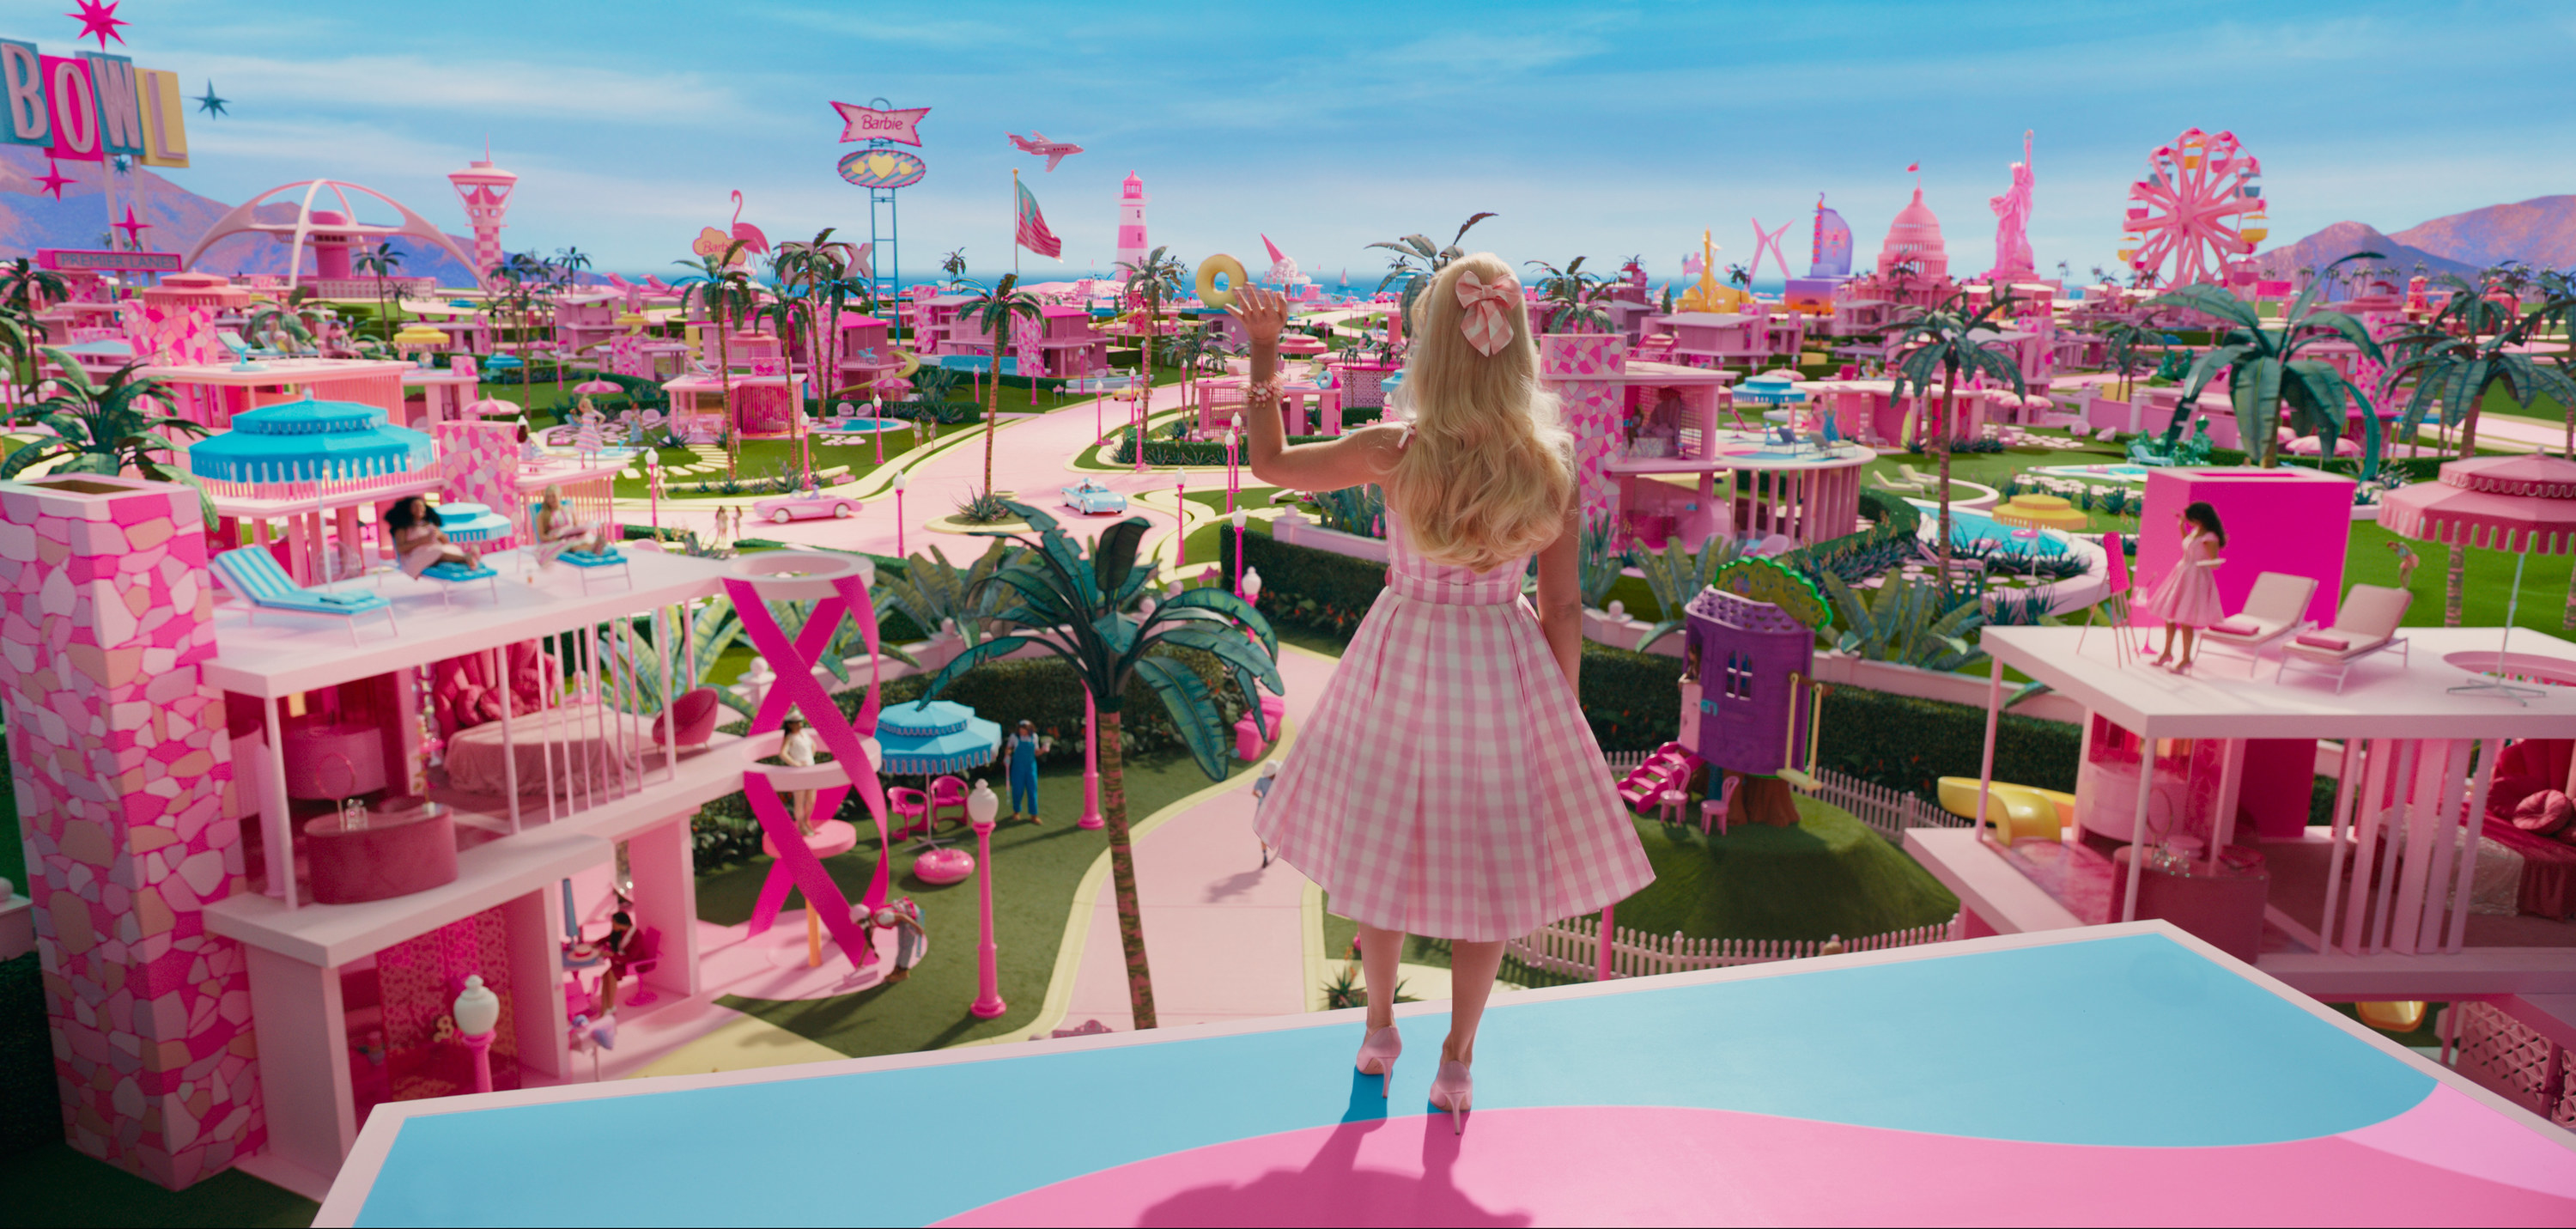 Barbie looking at her very pink dream world with many Barbie houses on the grass